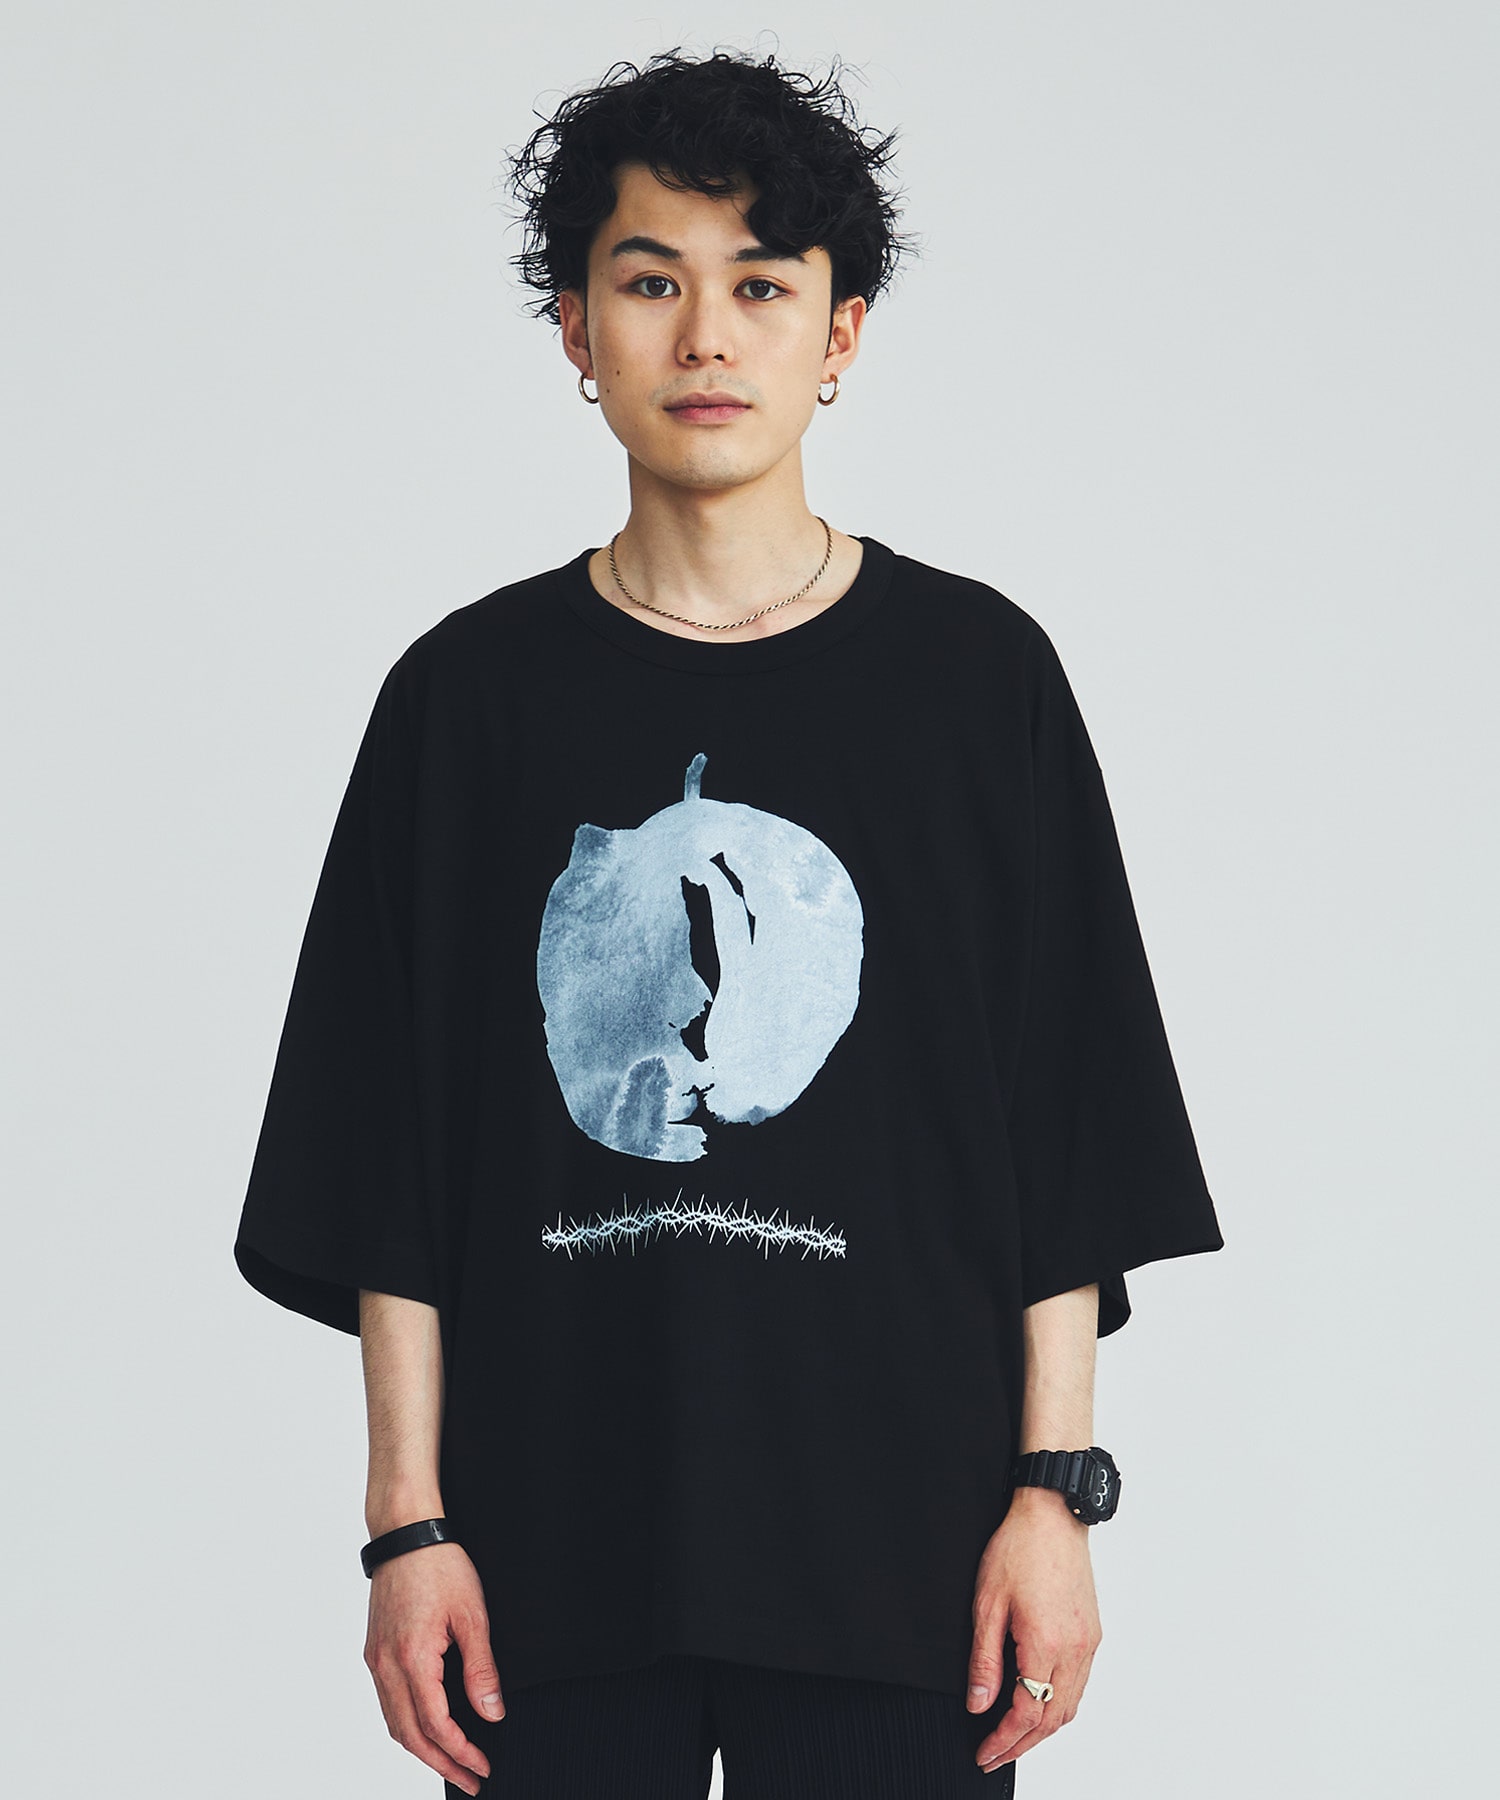 ABSTRACT APPLE S/S BIG-T